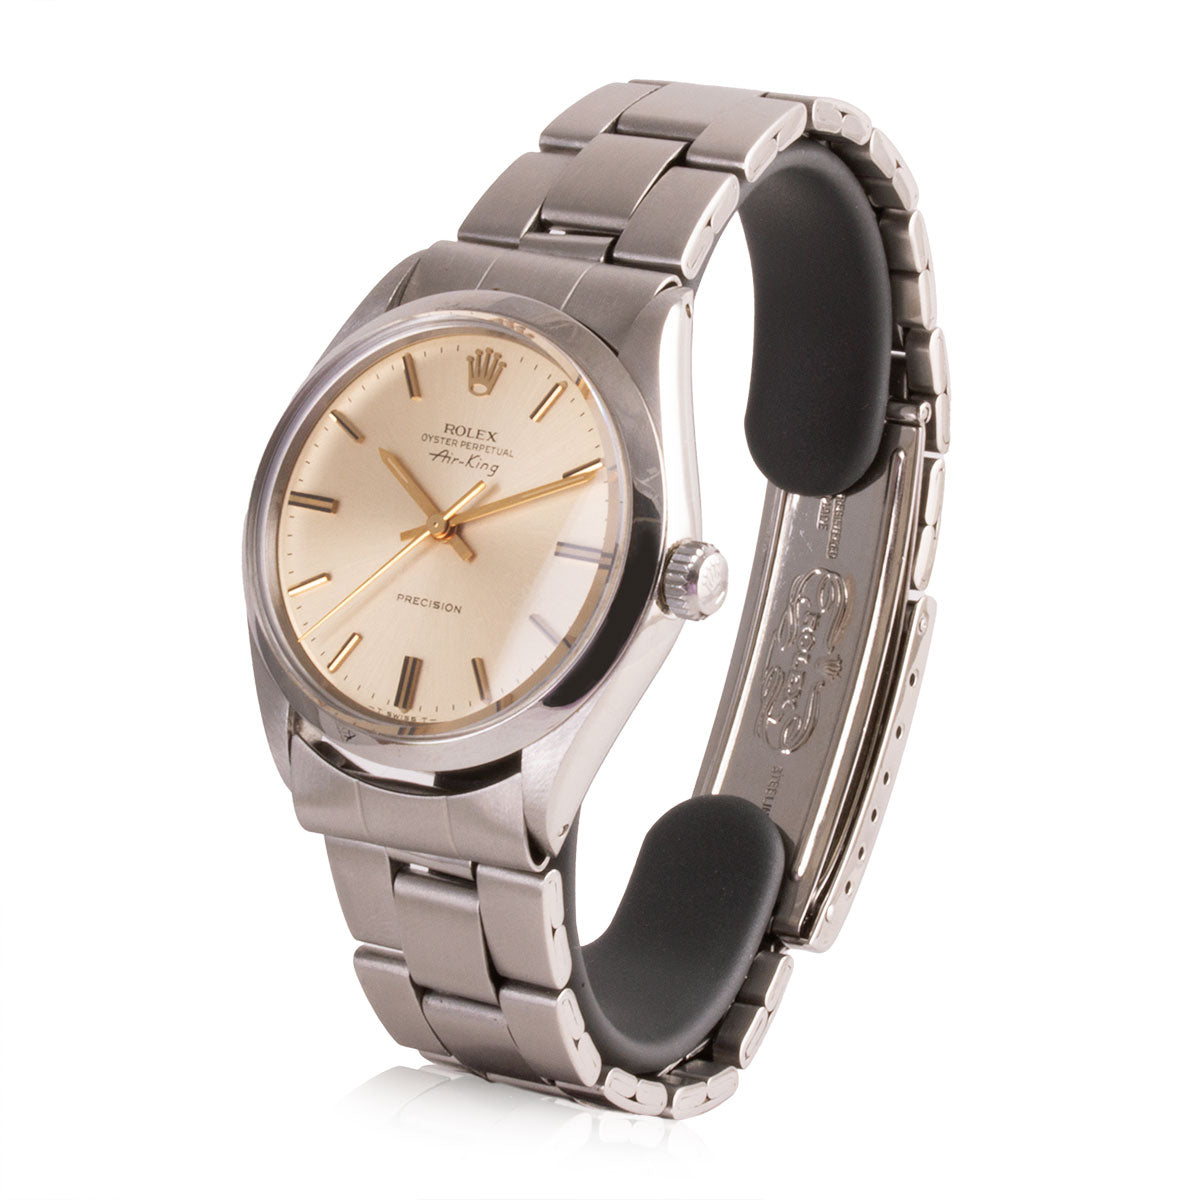 Second-hand watch - Rolex - Air-King Precision - 4700€